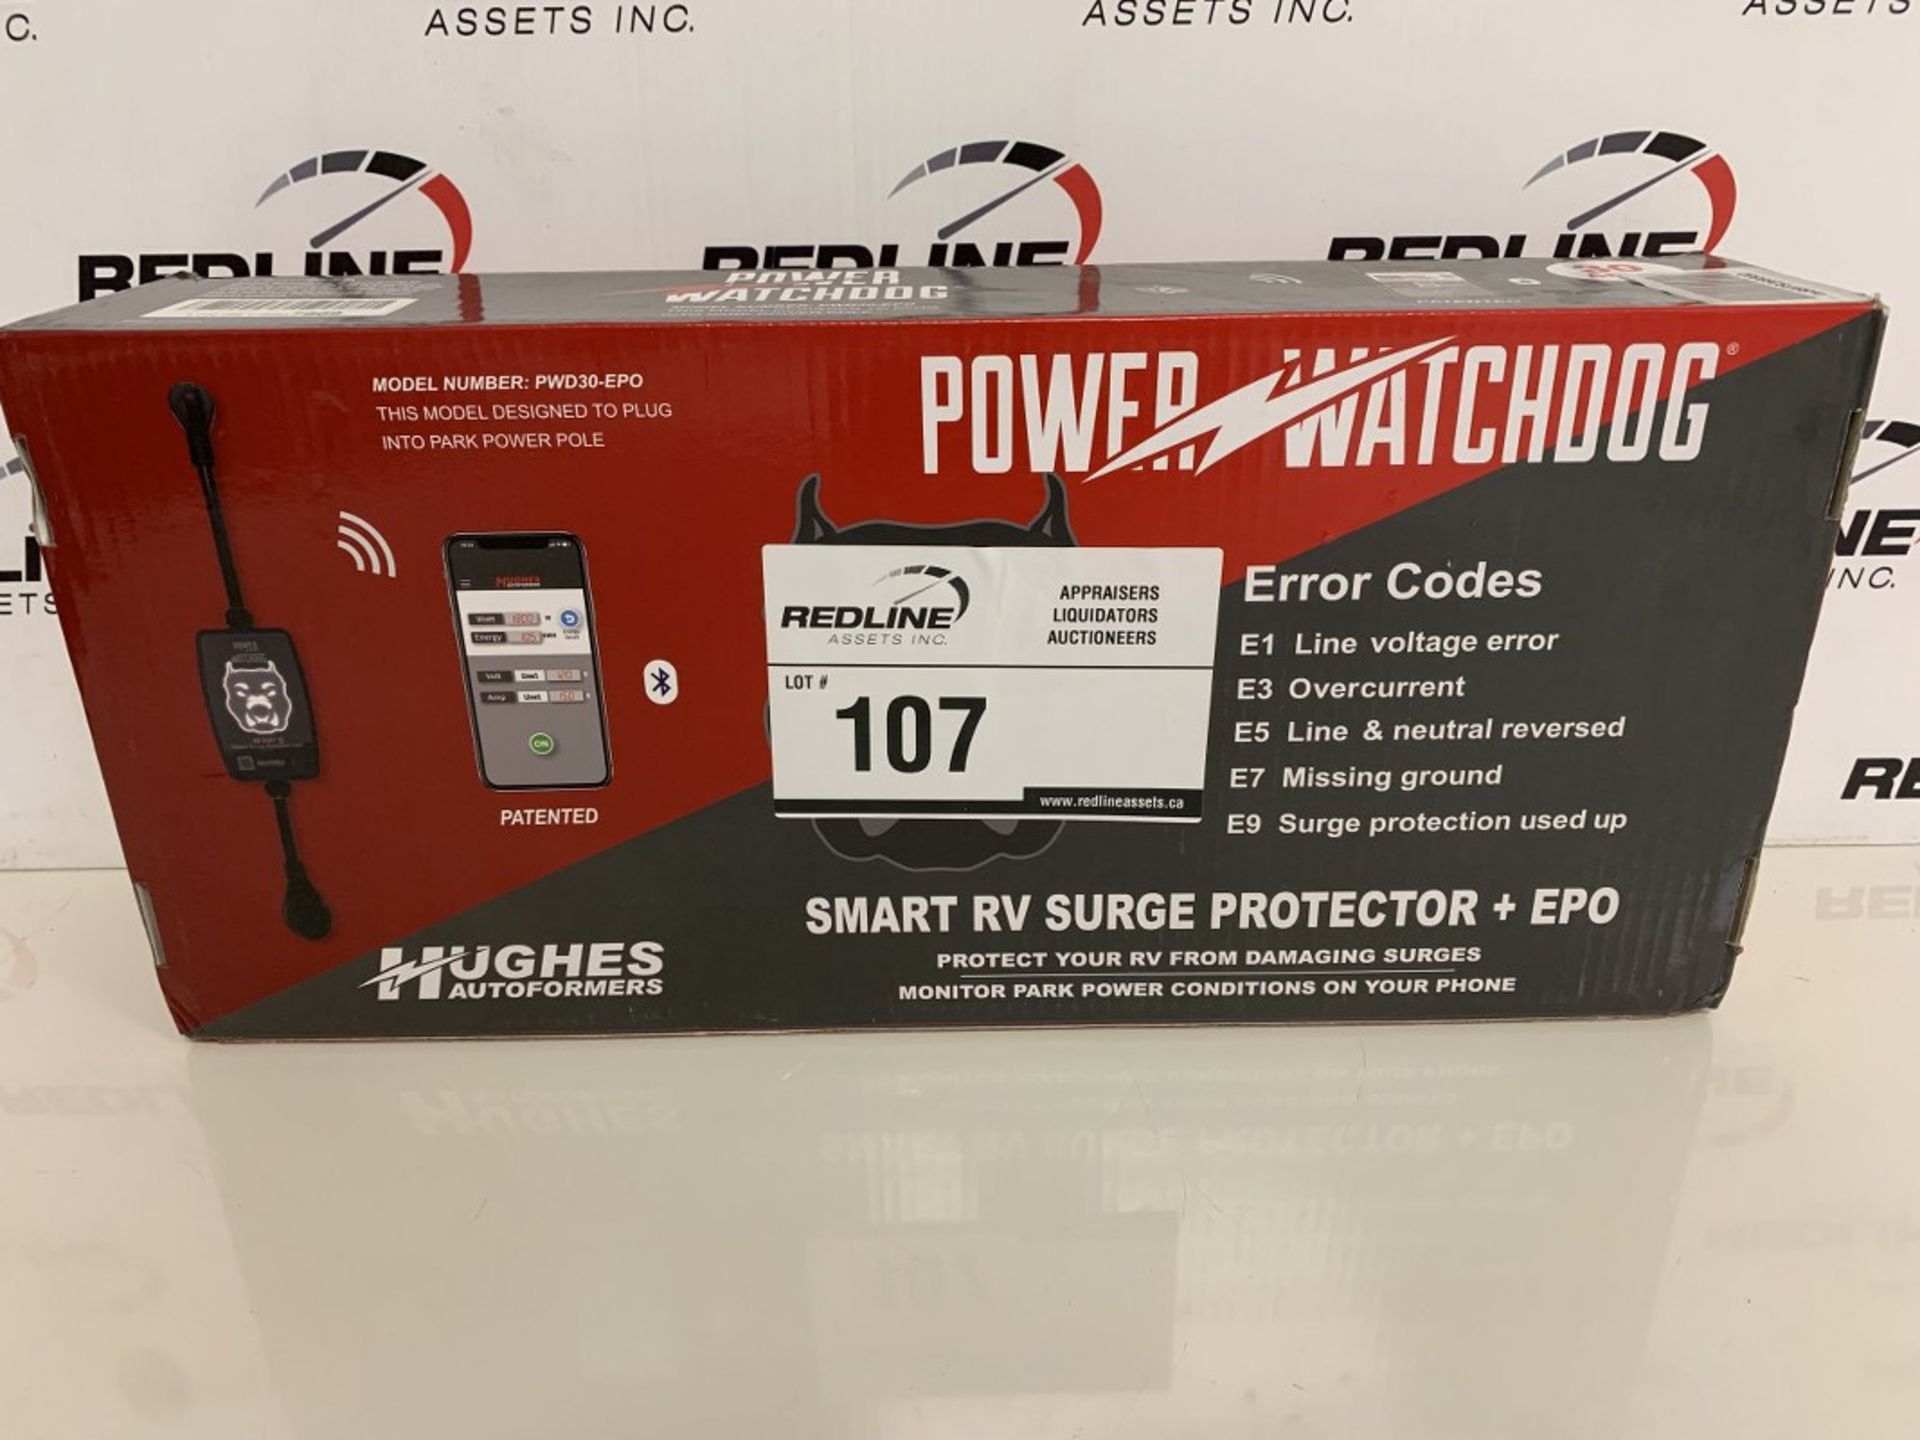 Power Watchdog - Smart Rv Surge Protector + Epo For Power Pole